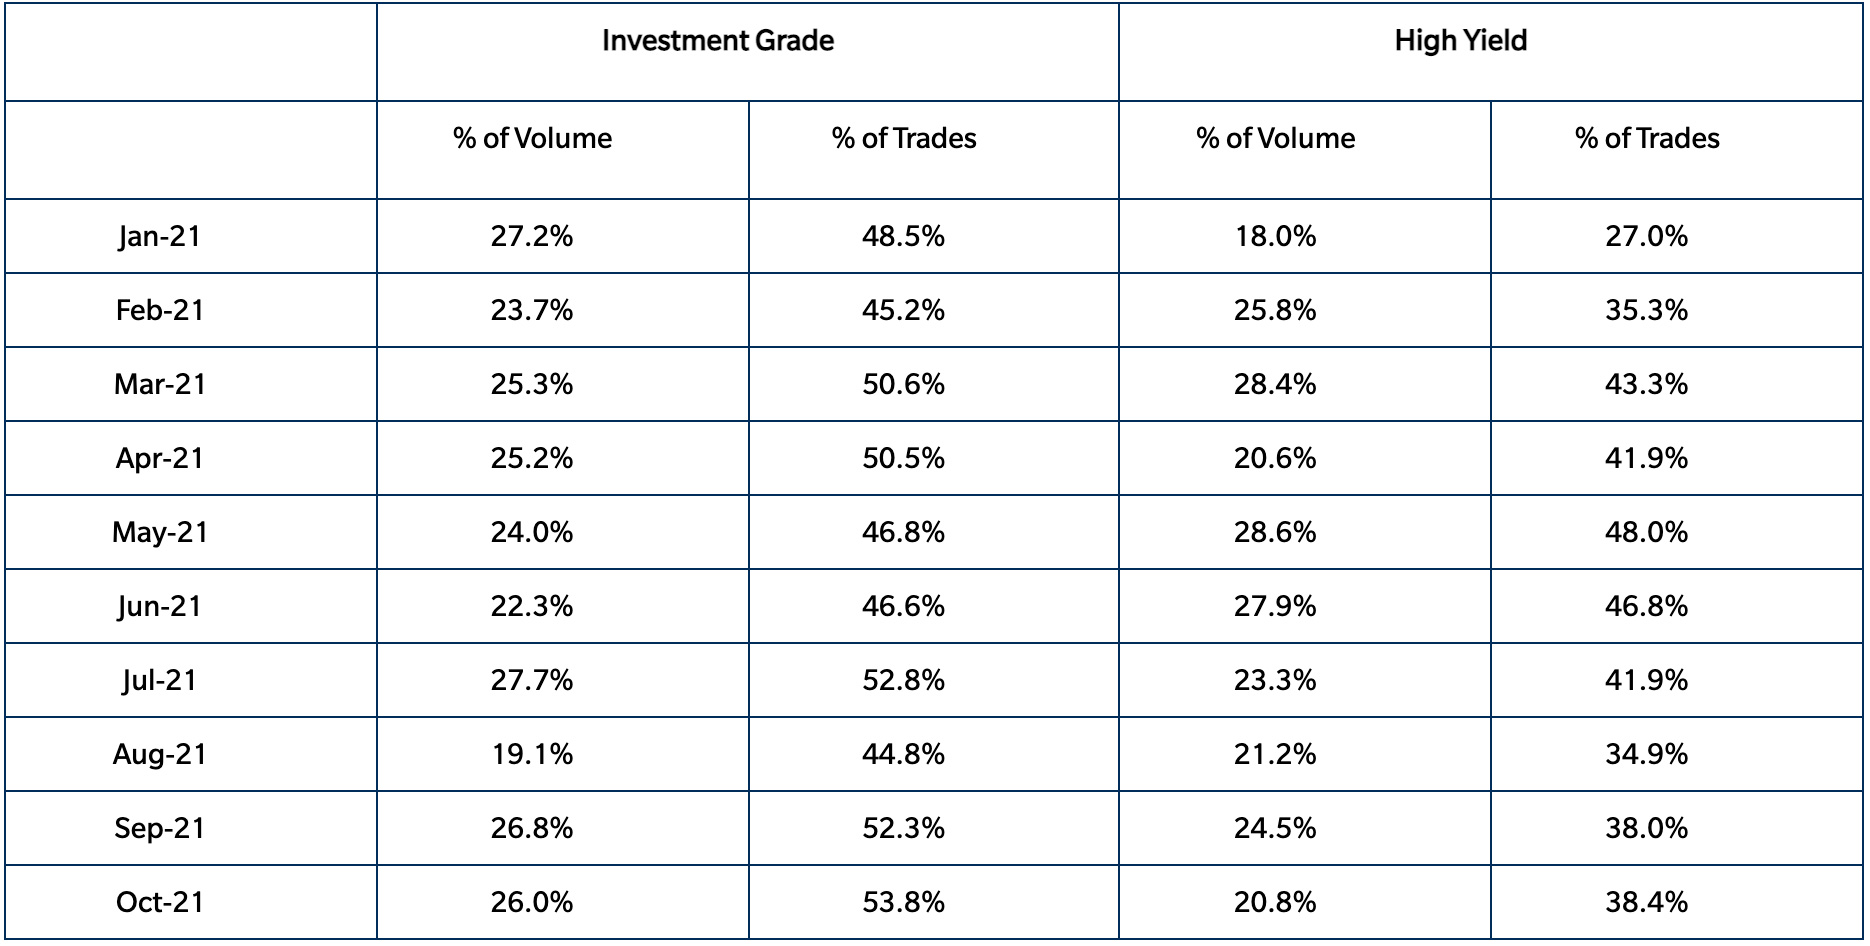 Table showing investment grade and high yield